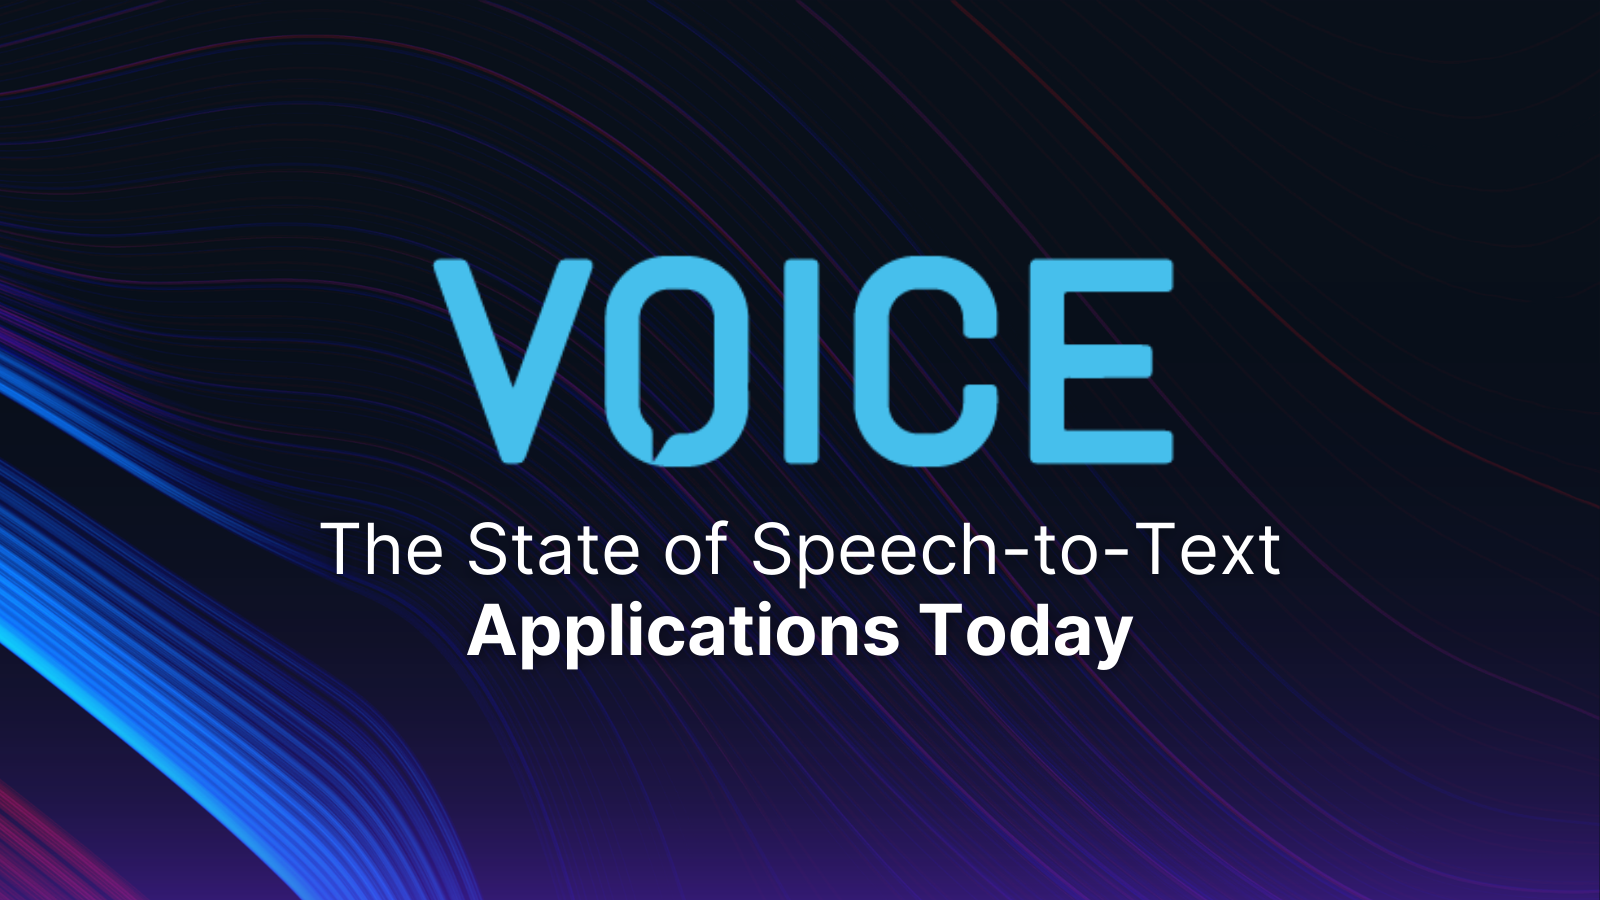 The State of Speech-to-Text Applications Today